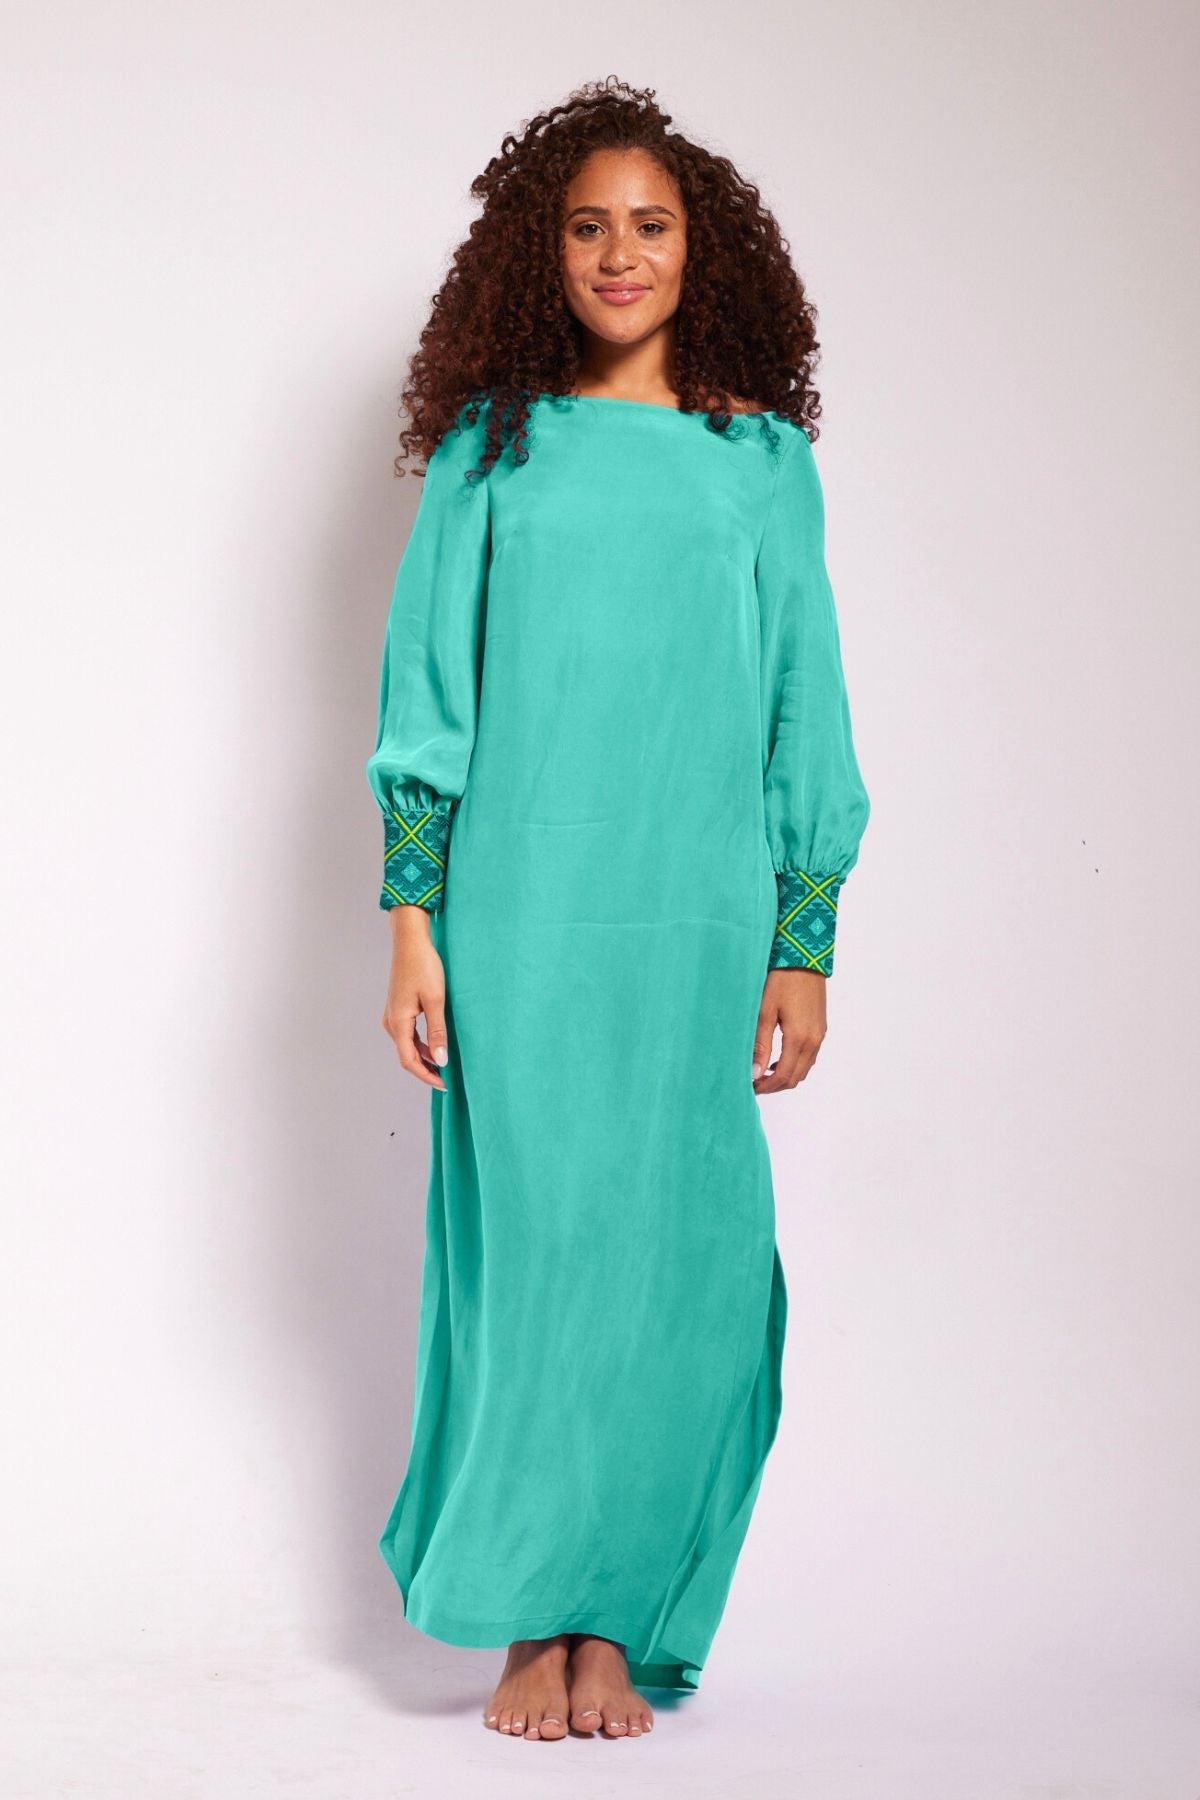 front view of woman wearing turquoise kaftan duster with embroidered sleeves made from recycled materials 4